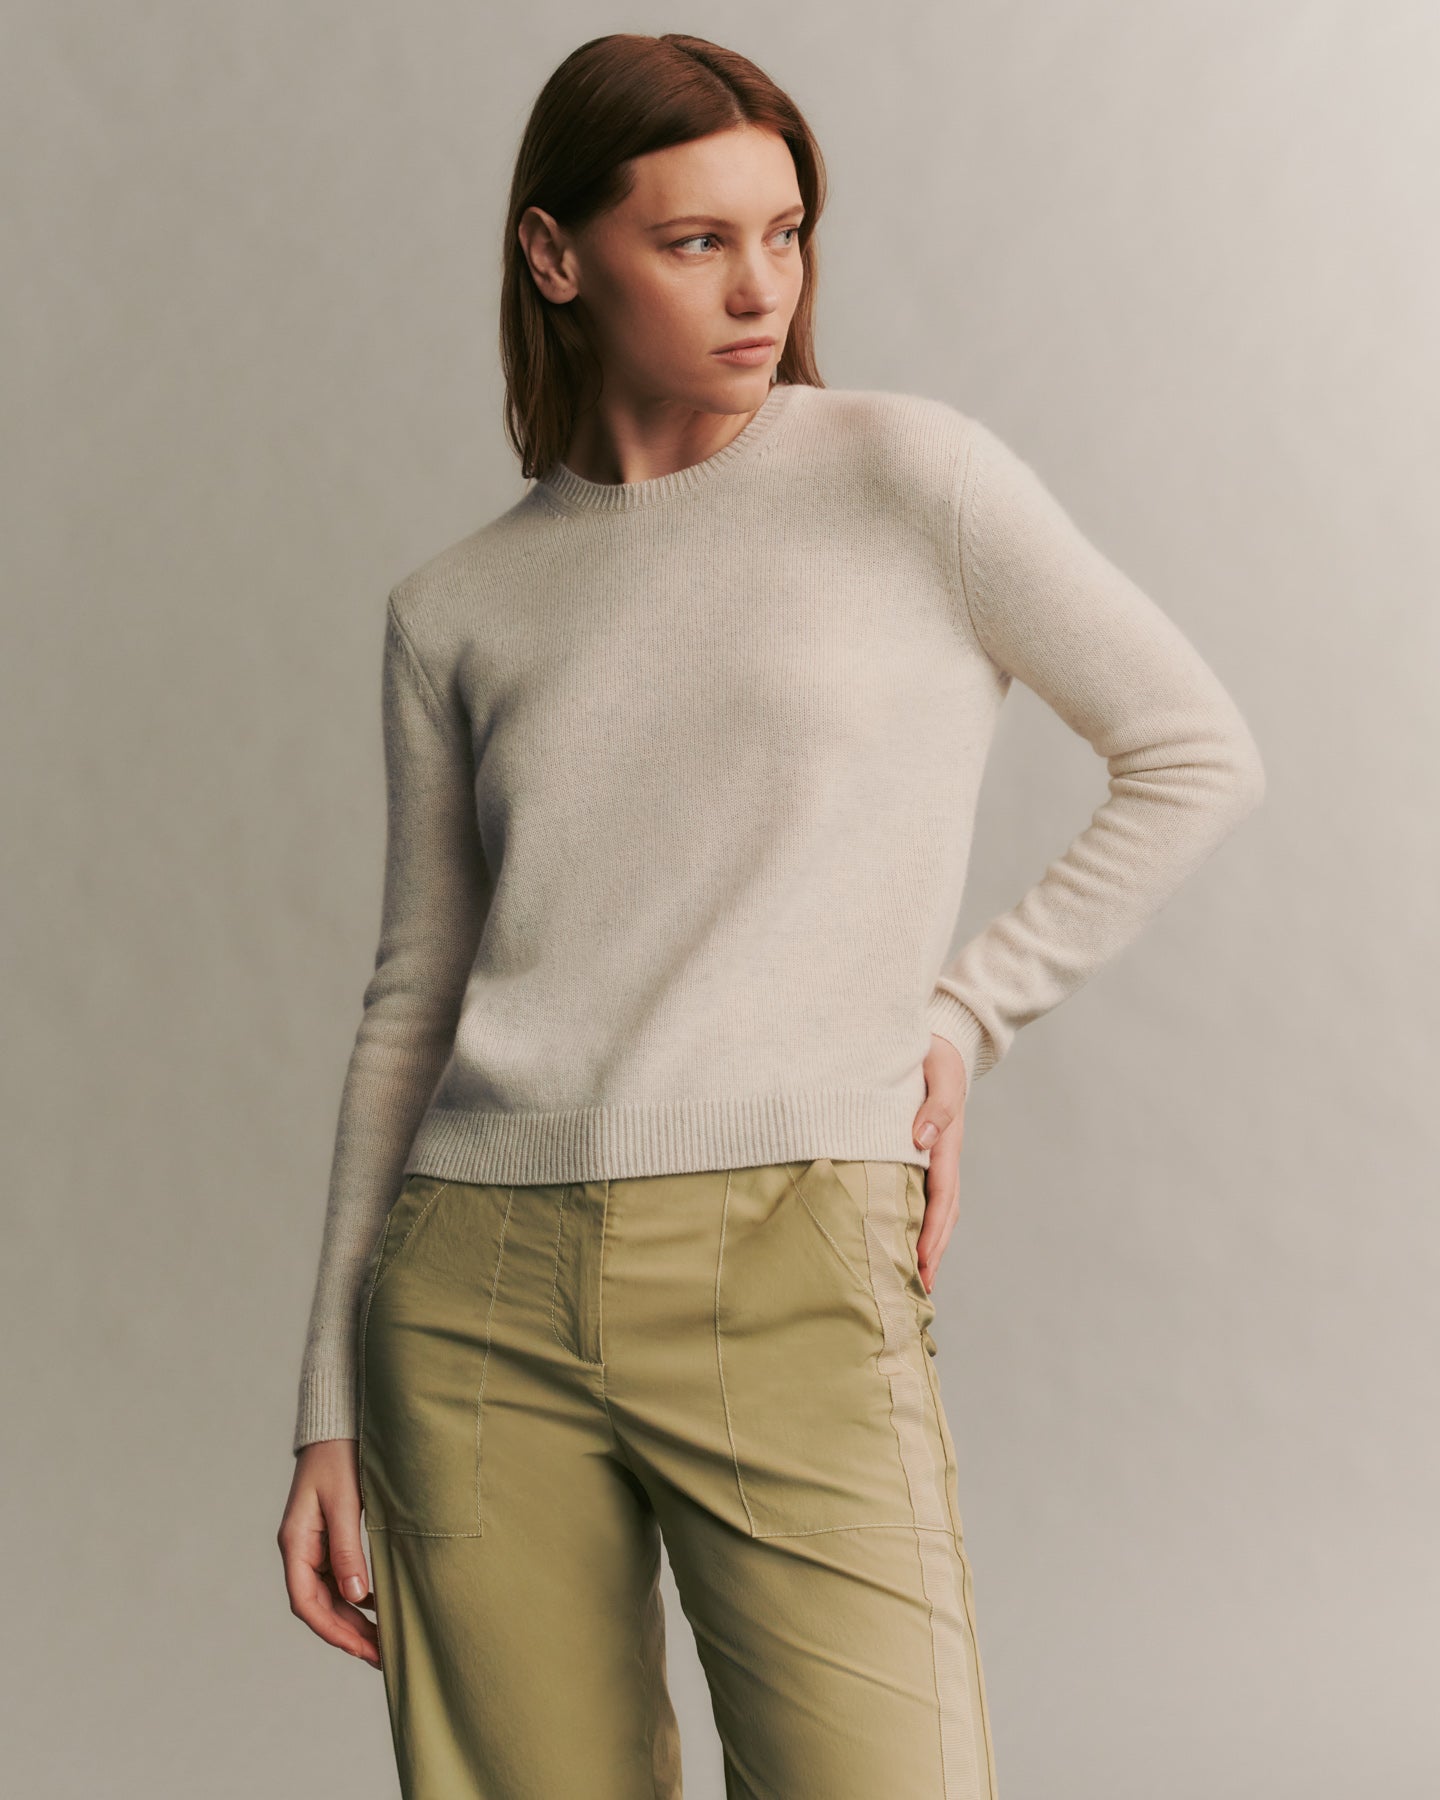 TWP White heather grey Jill Crewneck Sweater in cashmere view 1